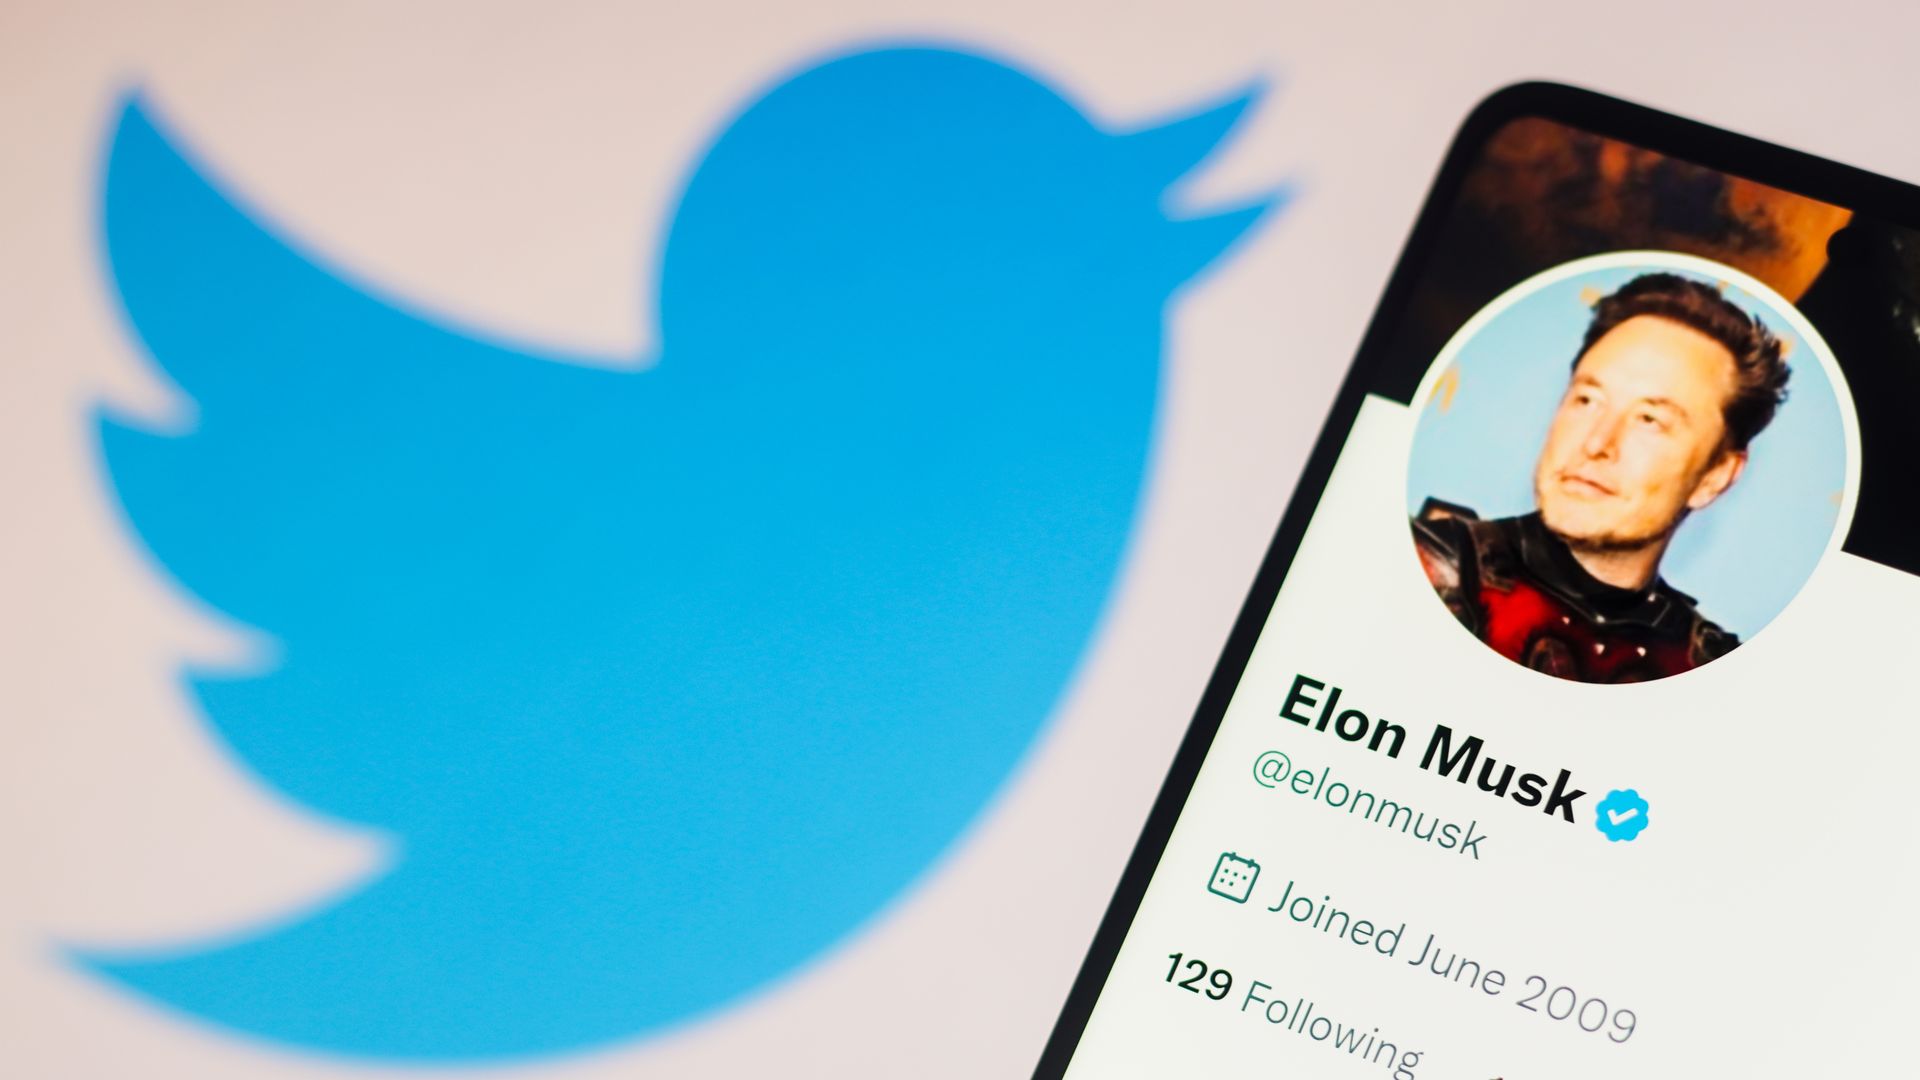 photo illustration, the Elon Musk Twitter account seen displayed on a smartphone and Twitter logo in the background. 